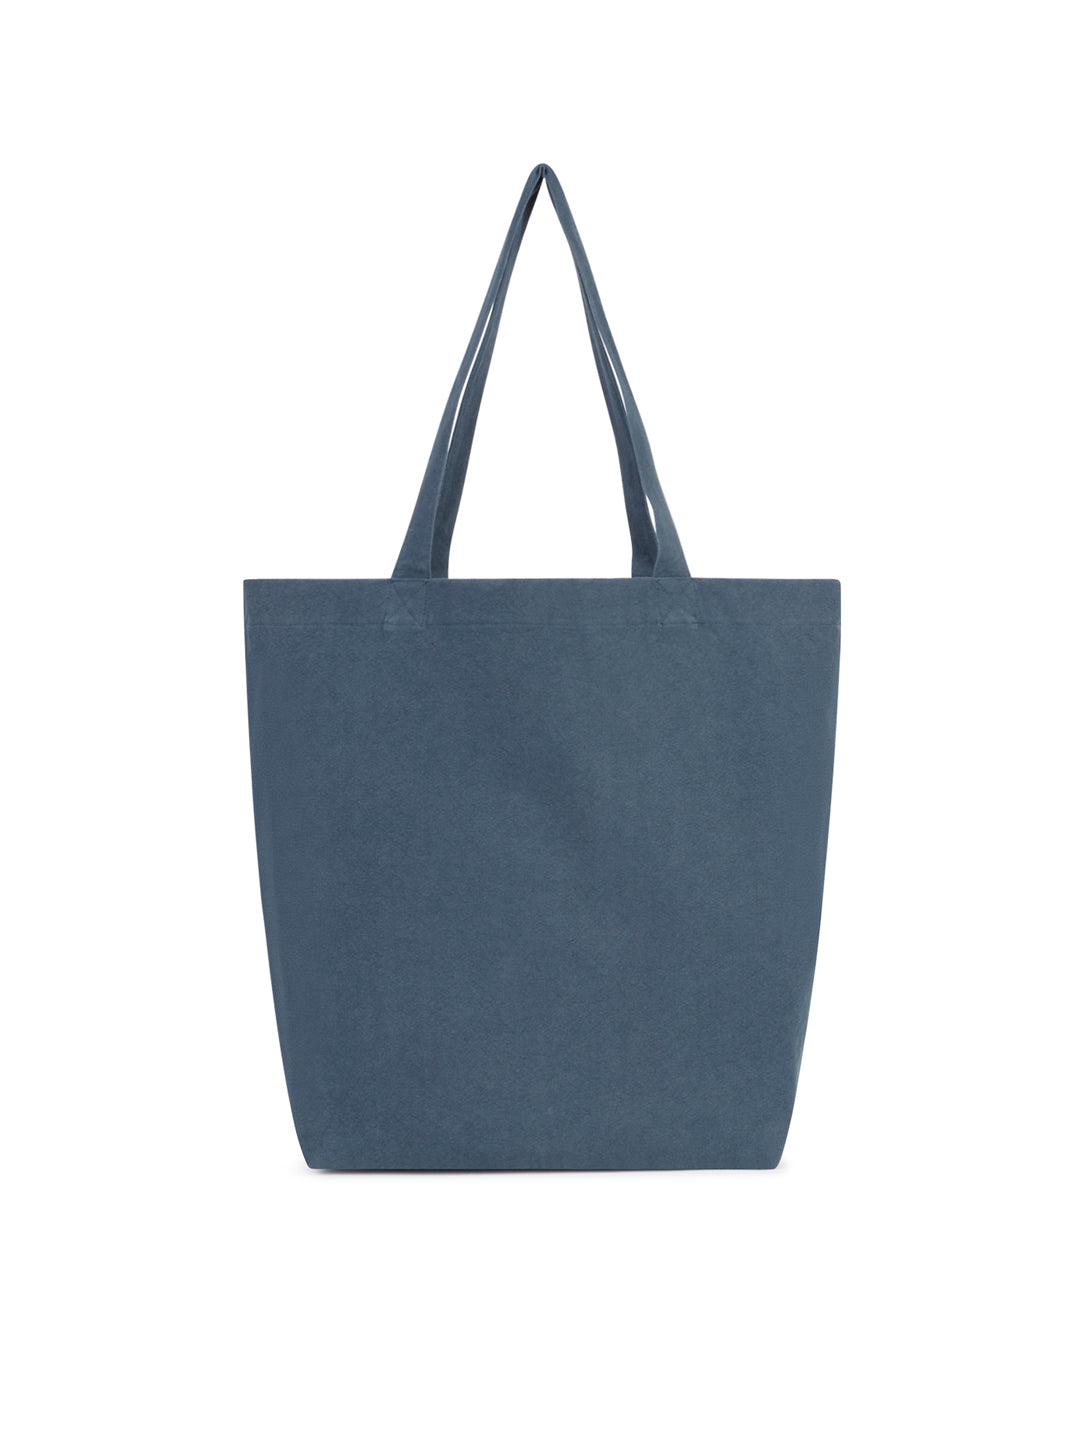 TWOTHIRDS Tote Bag - China Blue